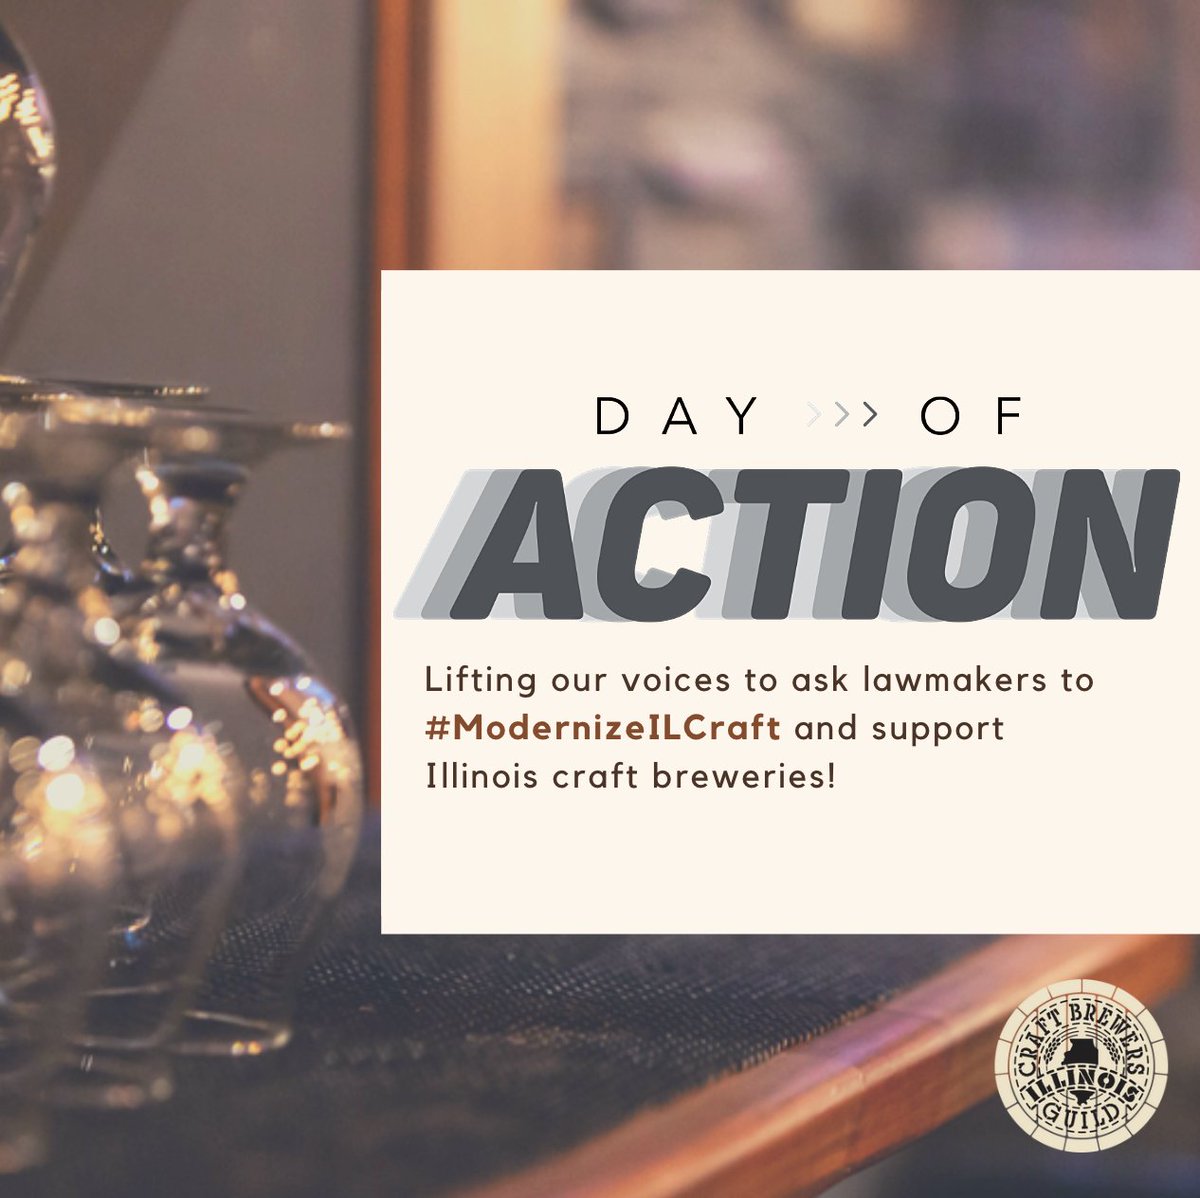 On Day 7 of @ILCraftBeerWeek, we're asking all our #IllinoisBeer fans, followers, and supporters to raise their voices and ask lawmakers to #ModernizeILCraft by passing our two active bills: consumer beer shipping and the beer omnibus bill.